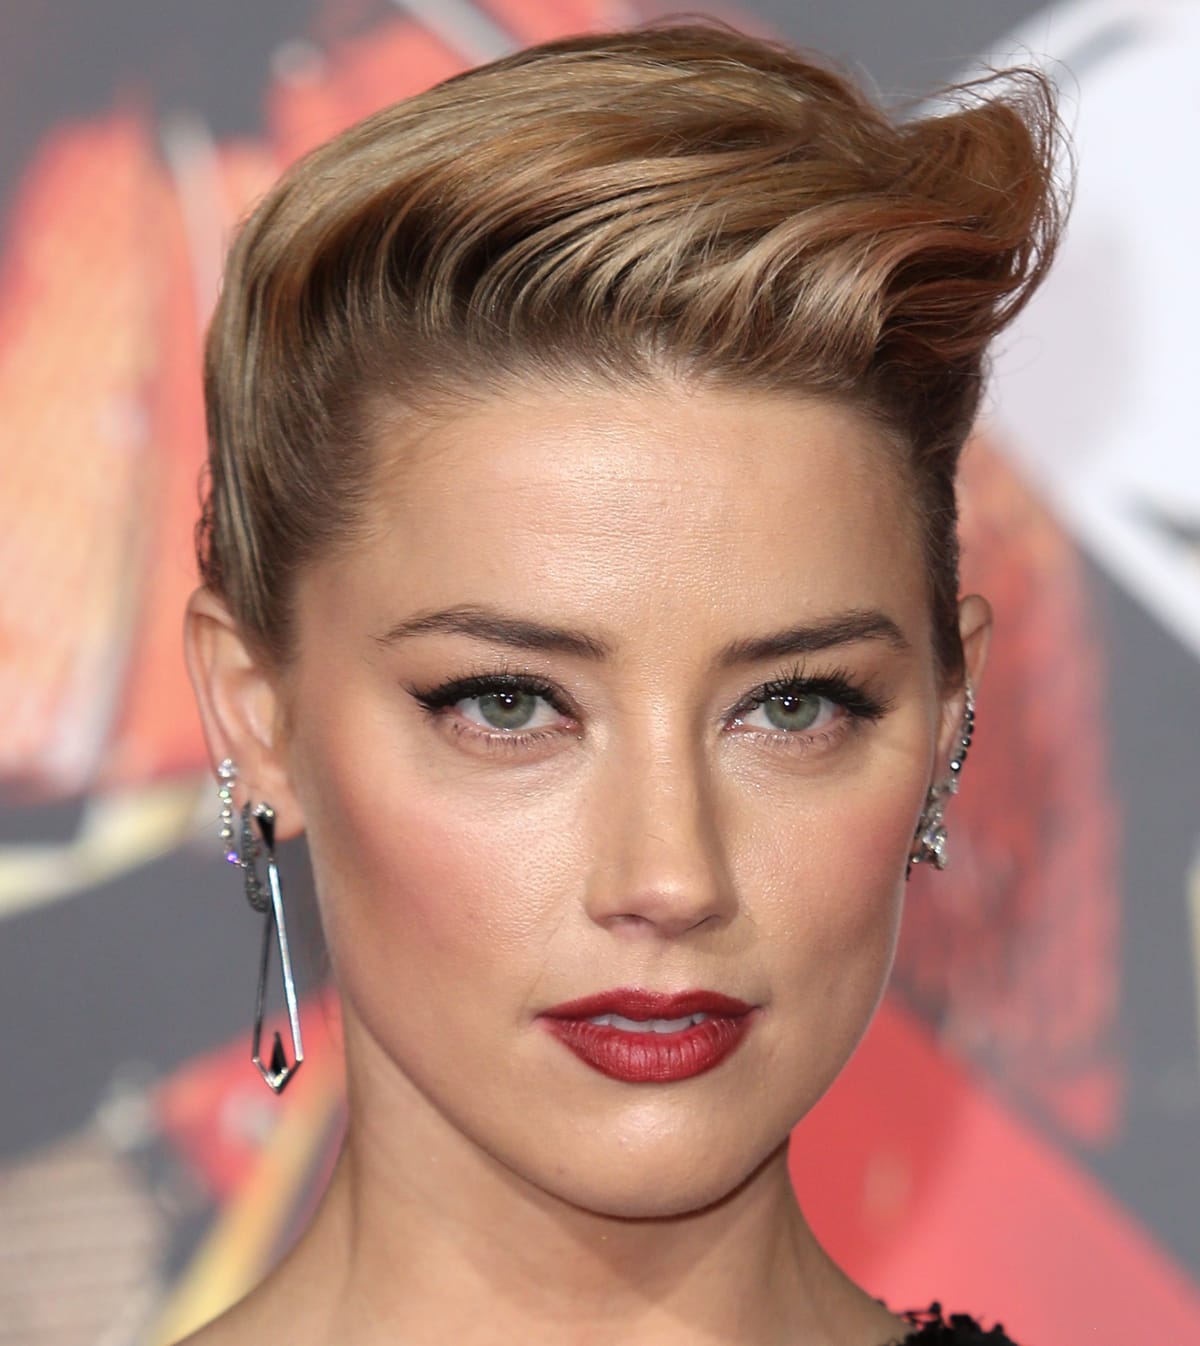 Amber Heard wears Eva Fehren earrings at the premiere of Warner Bros. Pictures' 'Justice League'